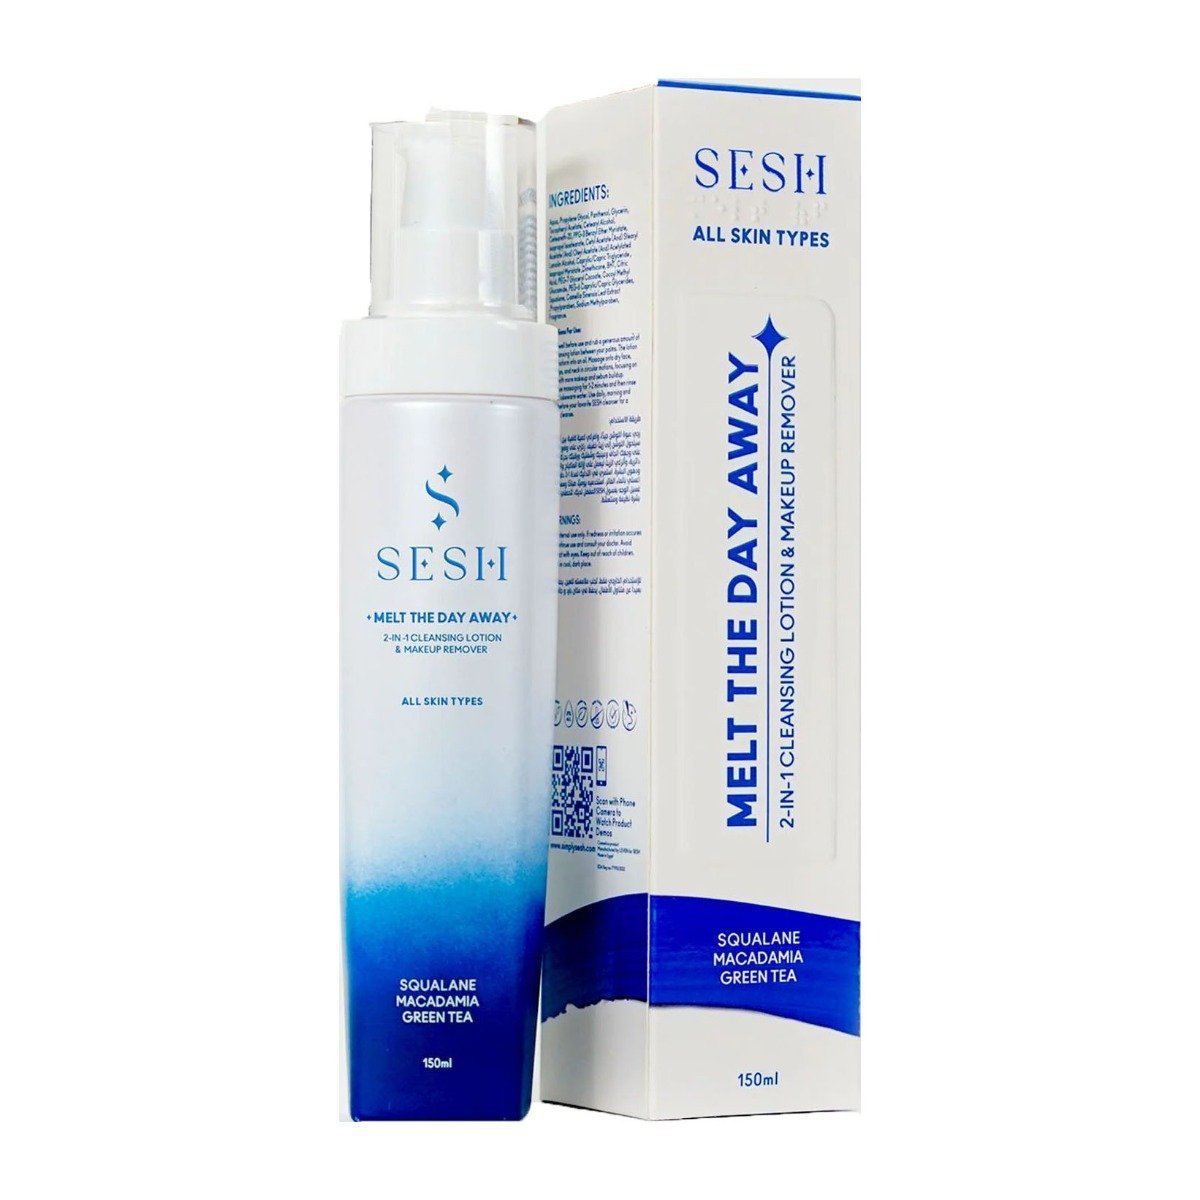 Sesh Melt The Day Away 2 In 1 Cleansing Lotion & Makeup Remover – 150ml - Bloom Pharmacy